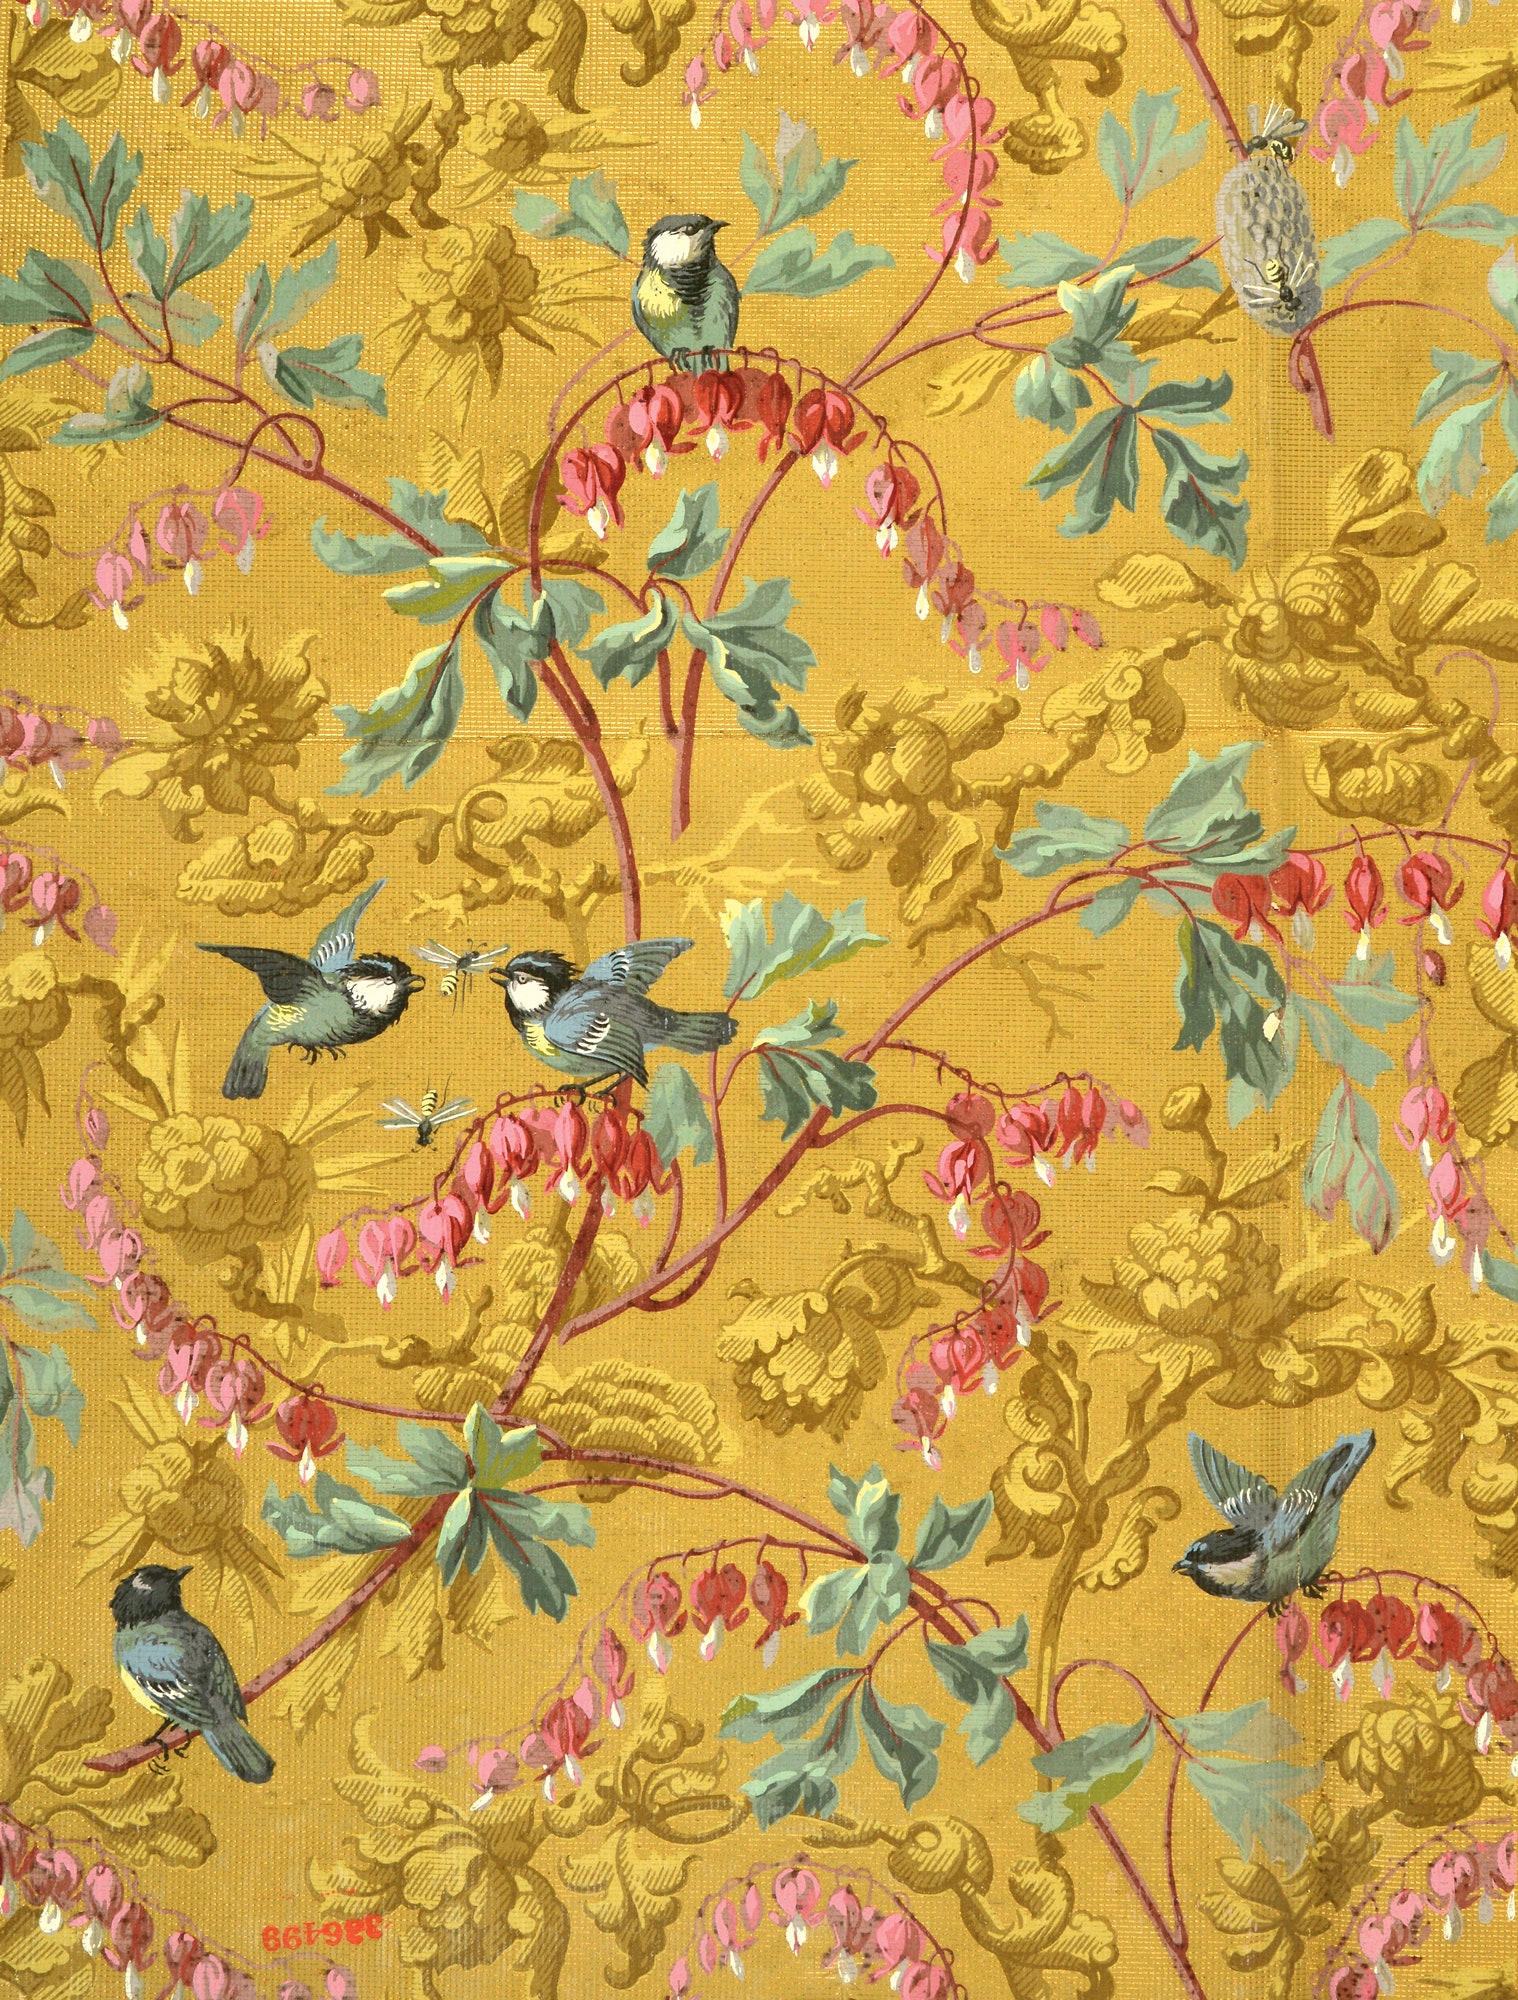 The Shocking History Of Arsenic Laced Wallpaper